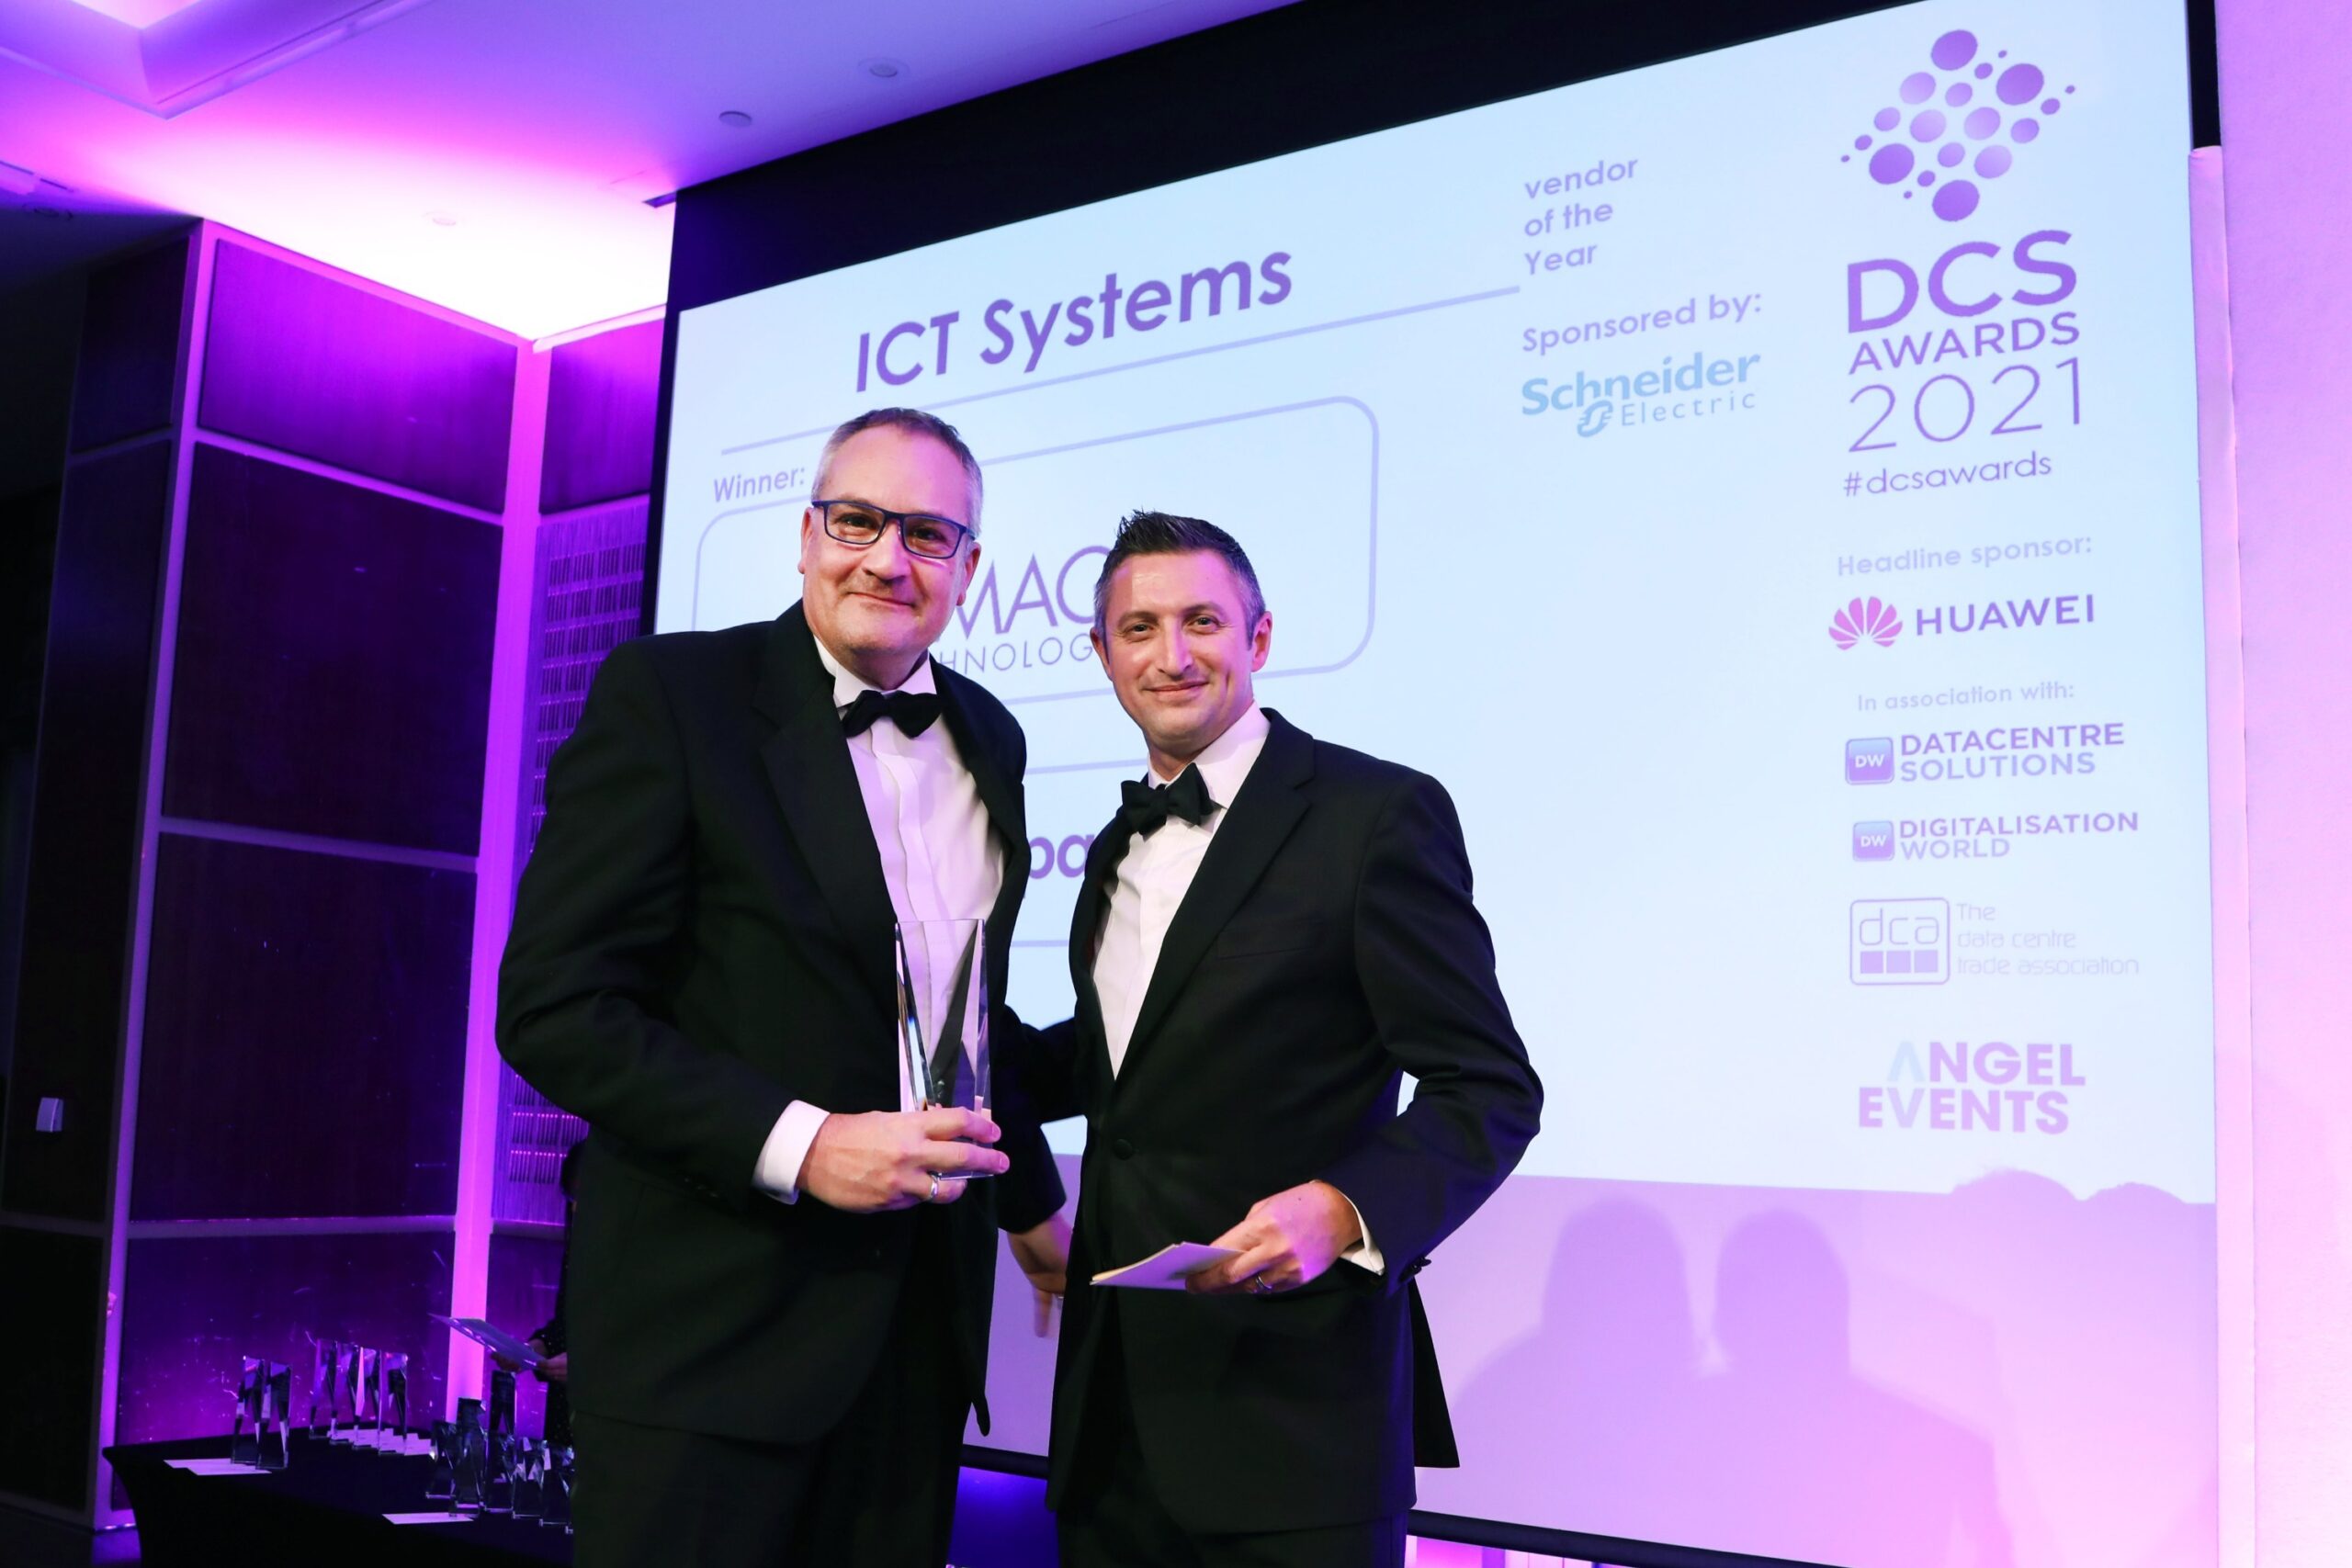 AMAG Technology wins the DCS Award for Data Center ICT Systems Vendor of the Year